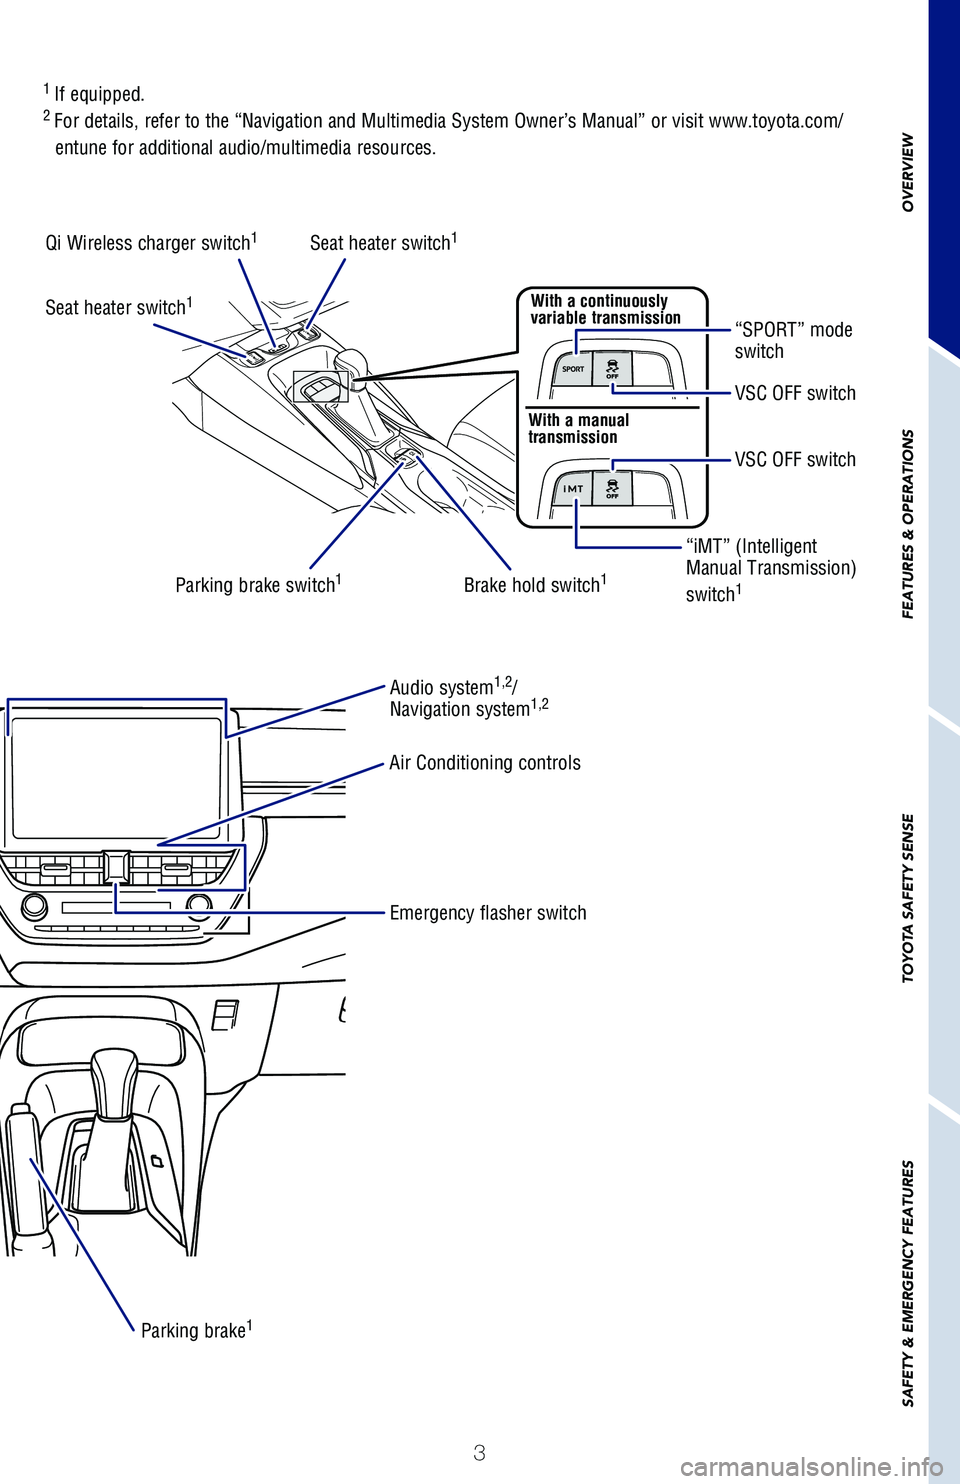 TOYOTA COROLLA 2020  Owners Manual (in English) 3
OVERVIEW
FEATURES & OPERATIONS
TOYOTA SAFETY SENSE
SAFETY & EMERGENCY FEATURES
Emergency flasher switch
Parking brake1
Audio system1,2/
Navigation system1,2
Air Conditioning controls
1  If equipped.